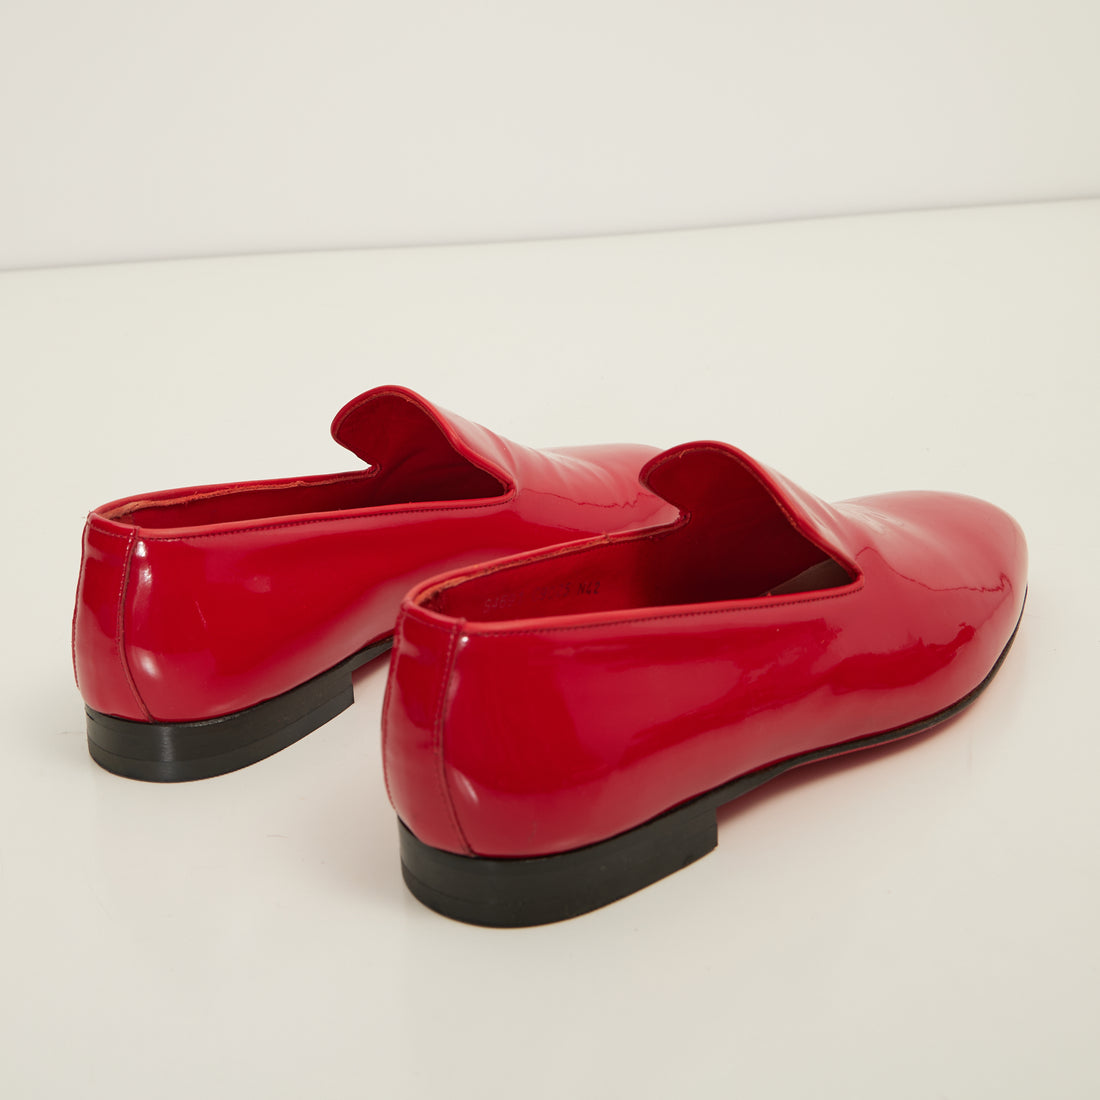 N° C9016 THE FORMAL LEATHER LOAFER - RED PATENT